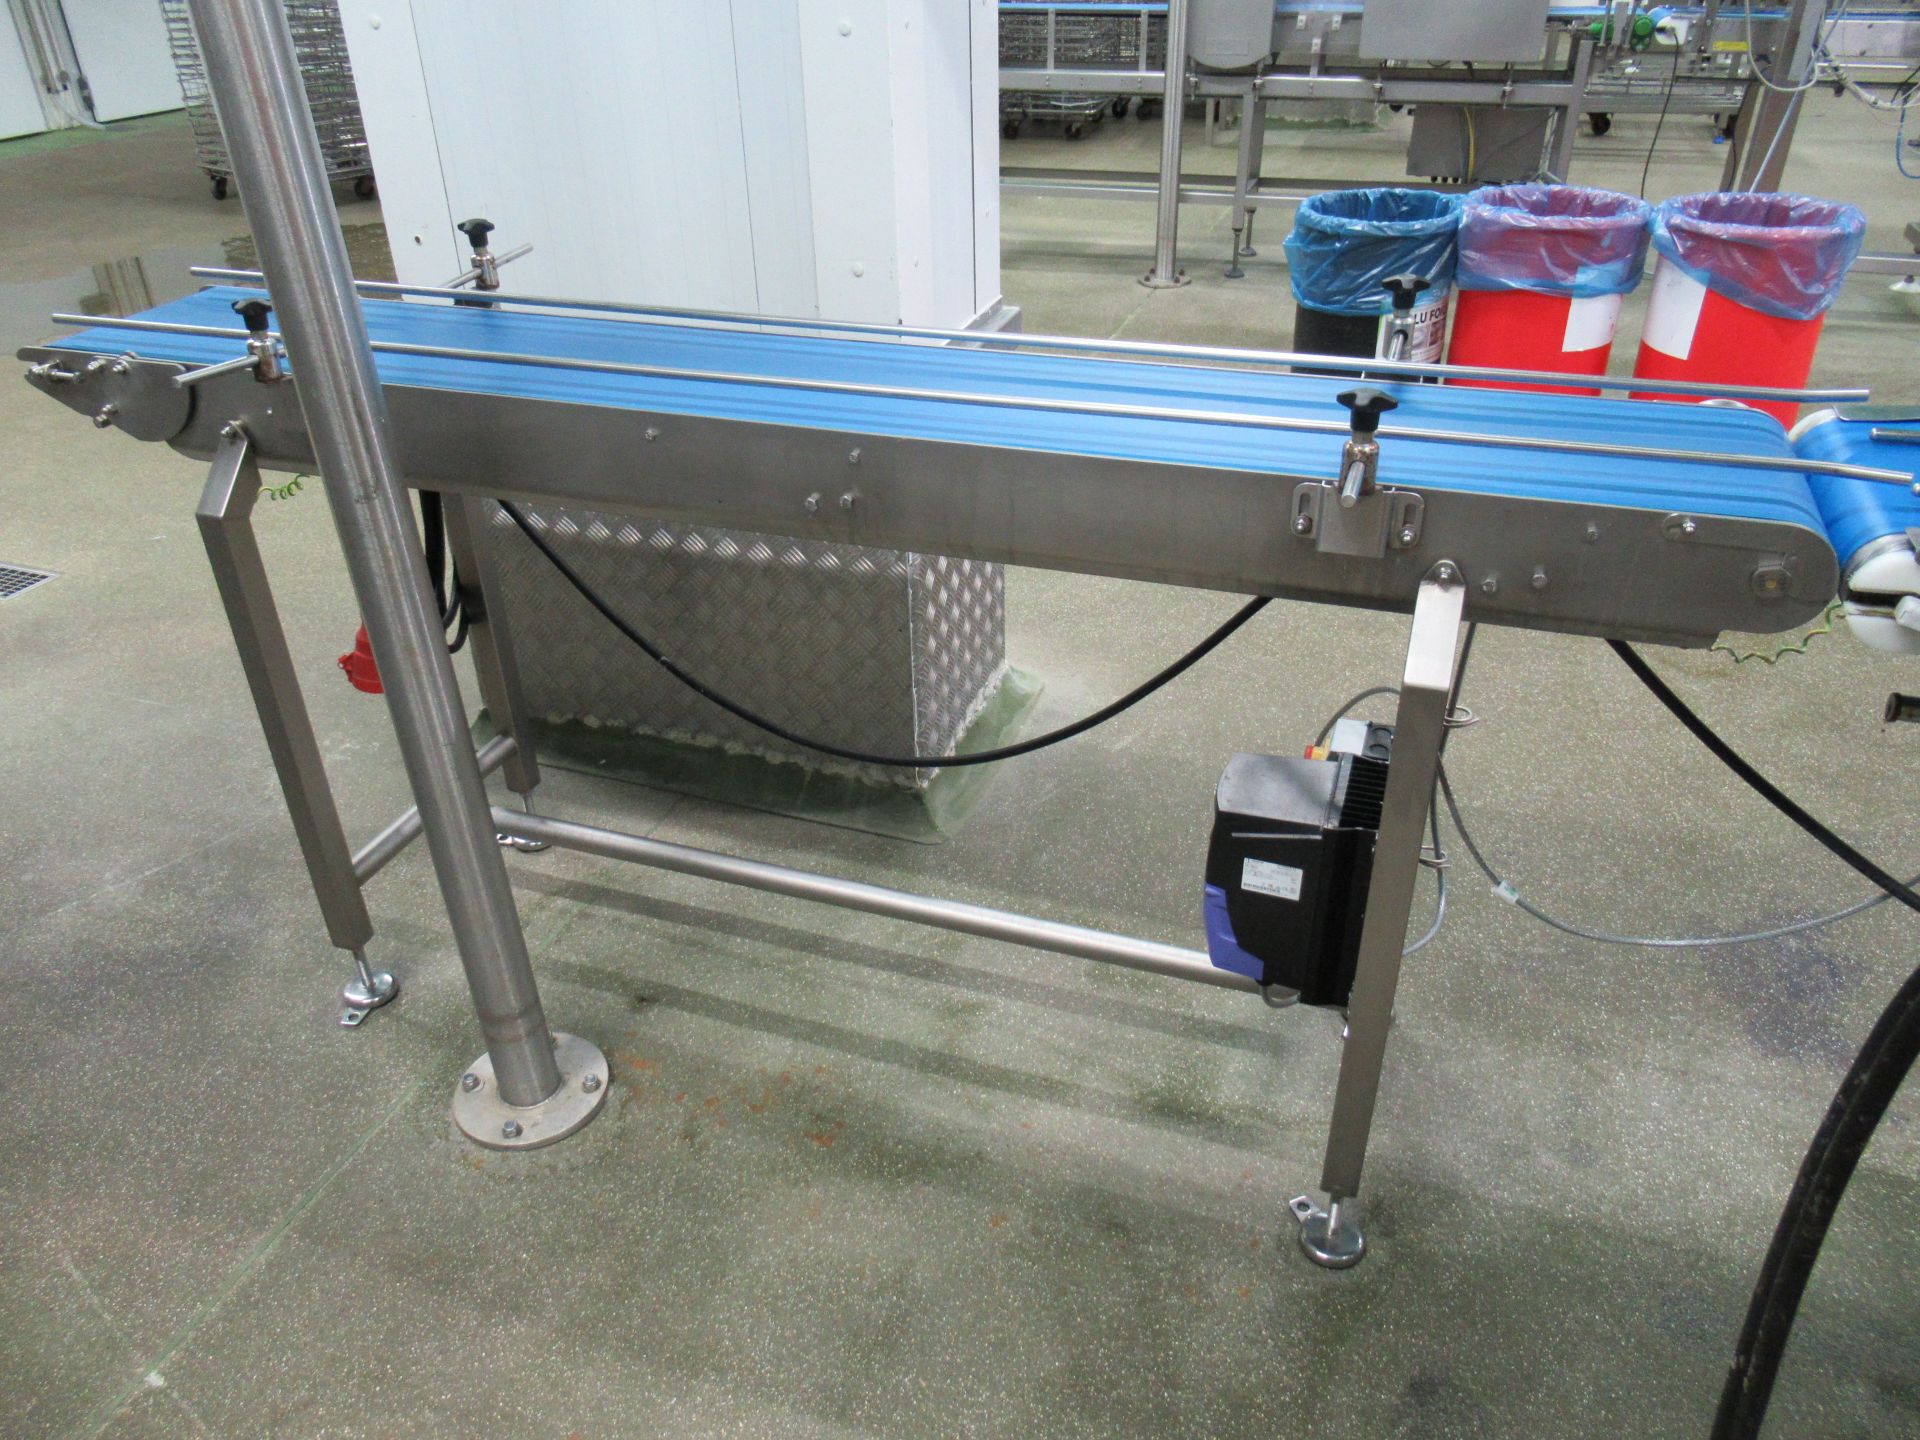 Syspal 512/PUC -1003 belt conveyor 1.9m long x 280mm wide with stainless steel frame Serial no: